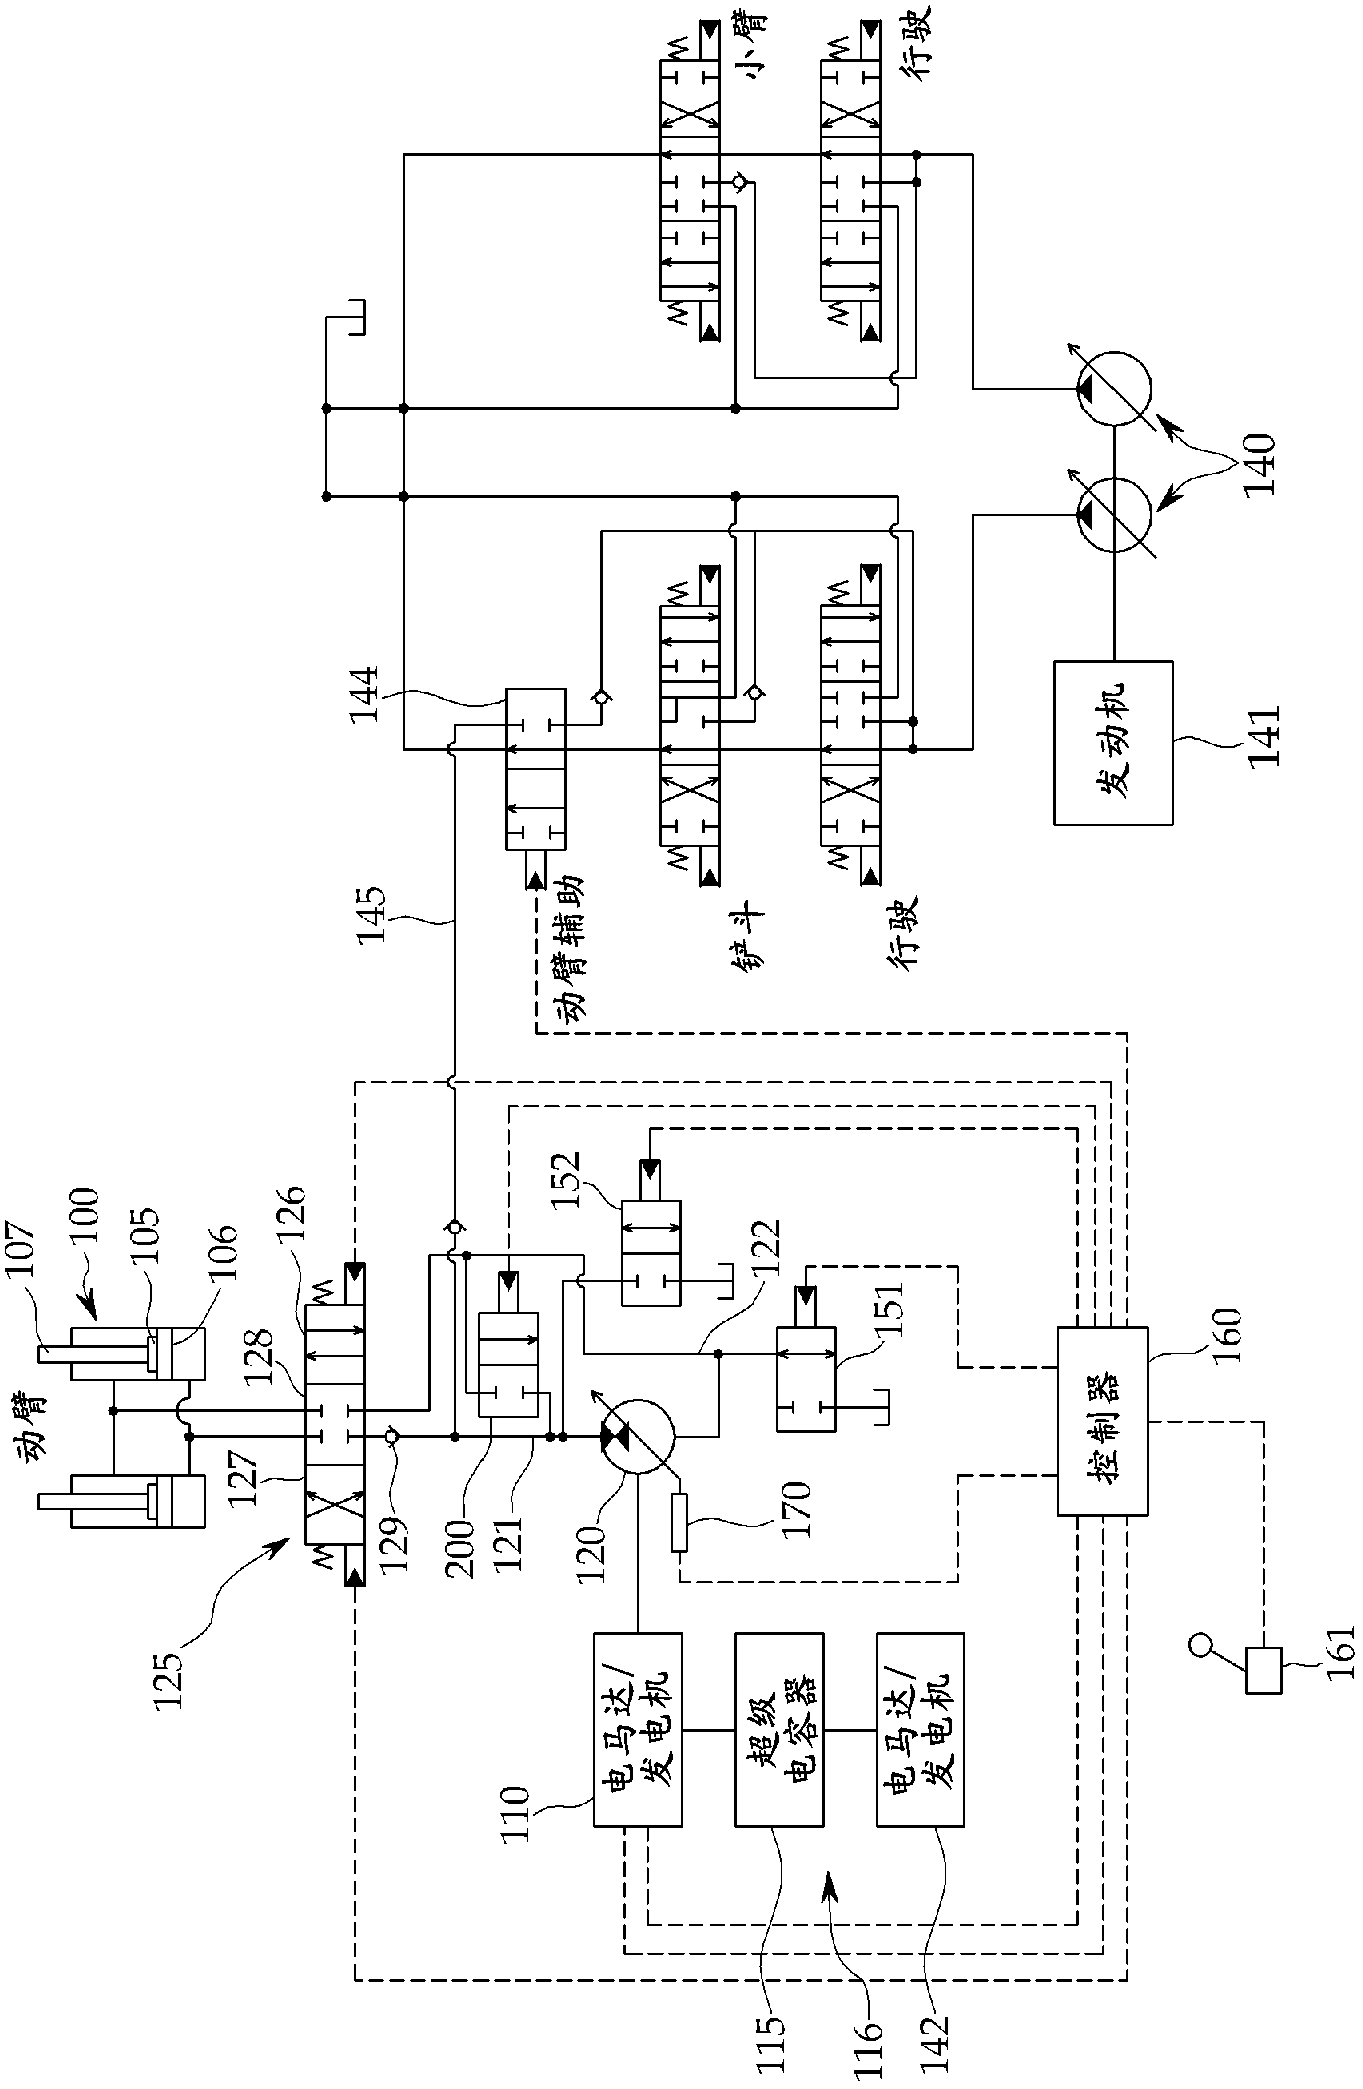 Hybrid excavator boom actuating system and method for controlling same